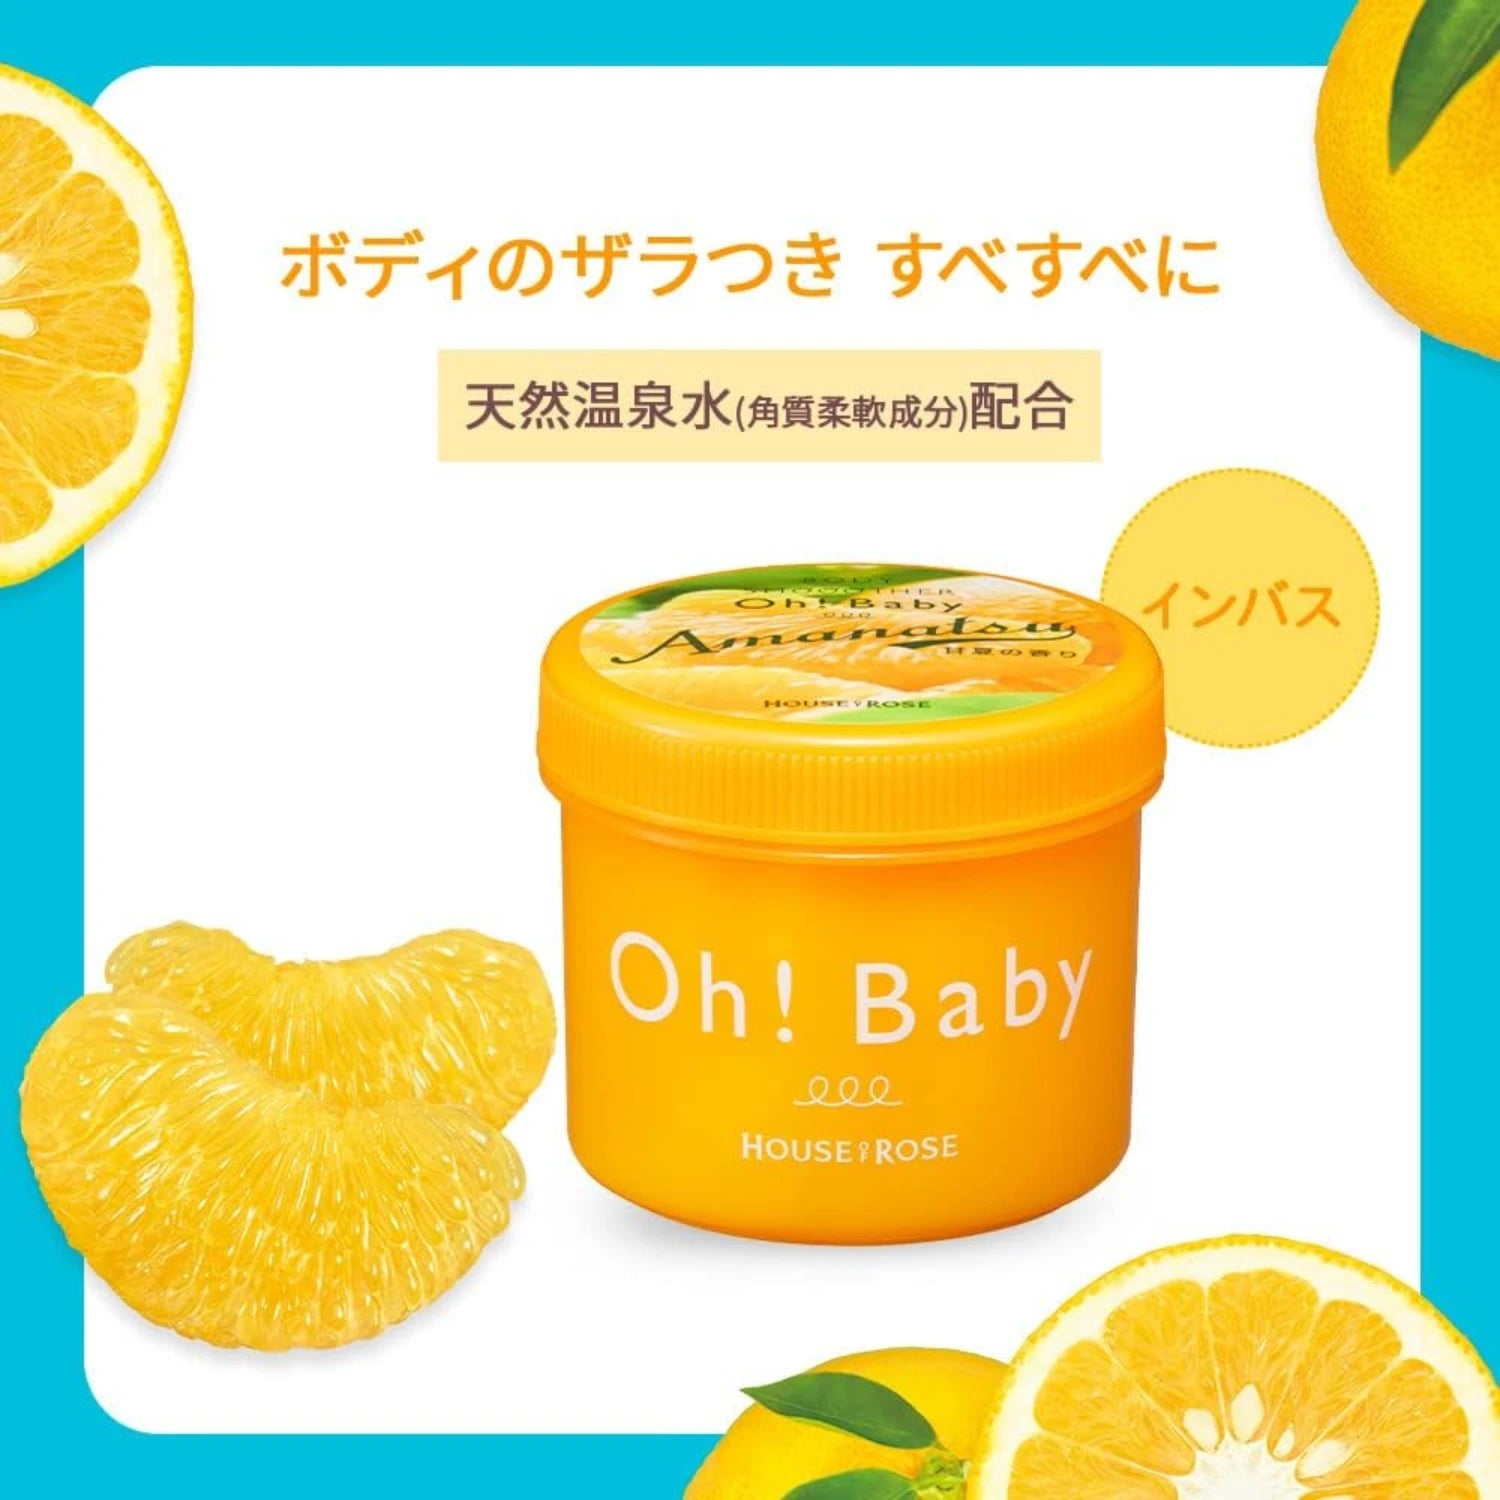 House Of Rose Oh! Baby Body Scrub Smoother Cream Sweet Summer 350g - Buy Me Japan